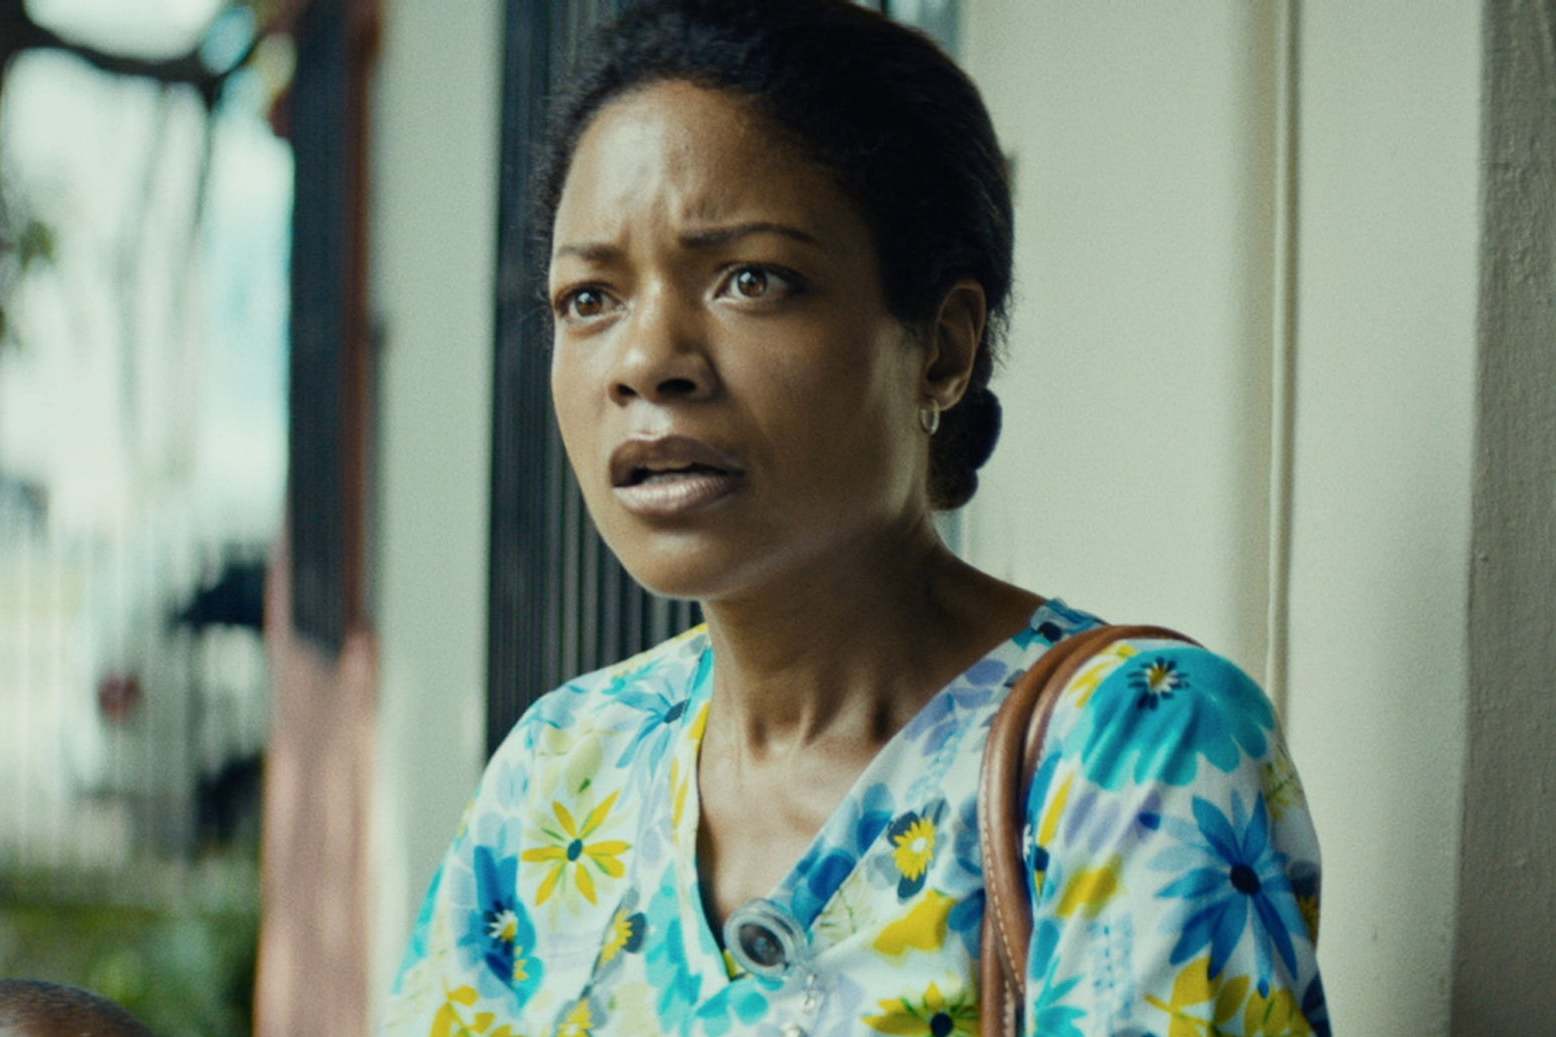 Harris’s role as Paula, a drug addict and mother in ‘Moonlight’, earned her an Oscar nomination